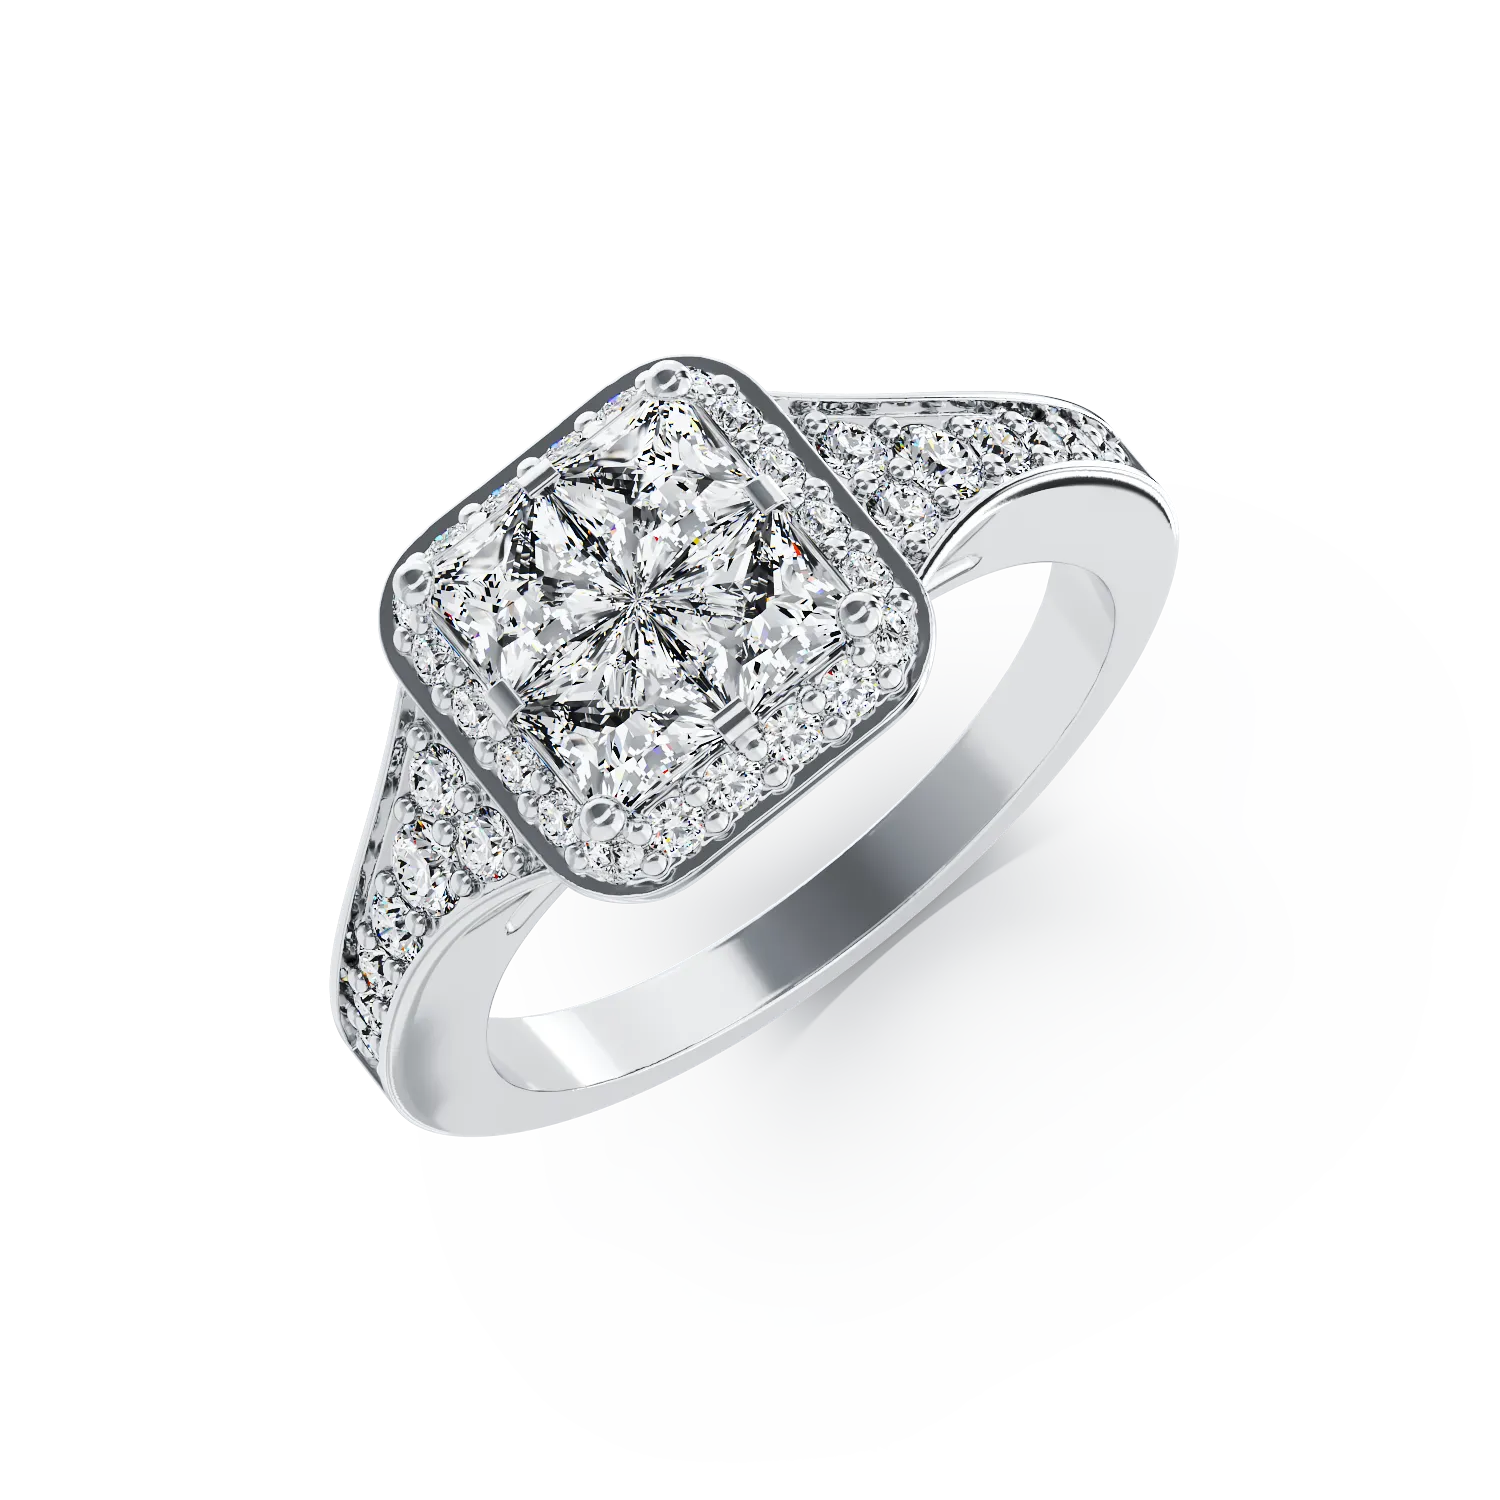 18K white gold engagement ring with 0.88ct diamonds